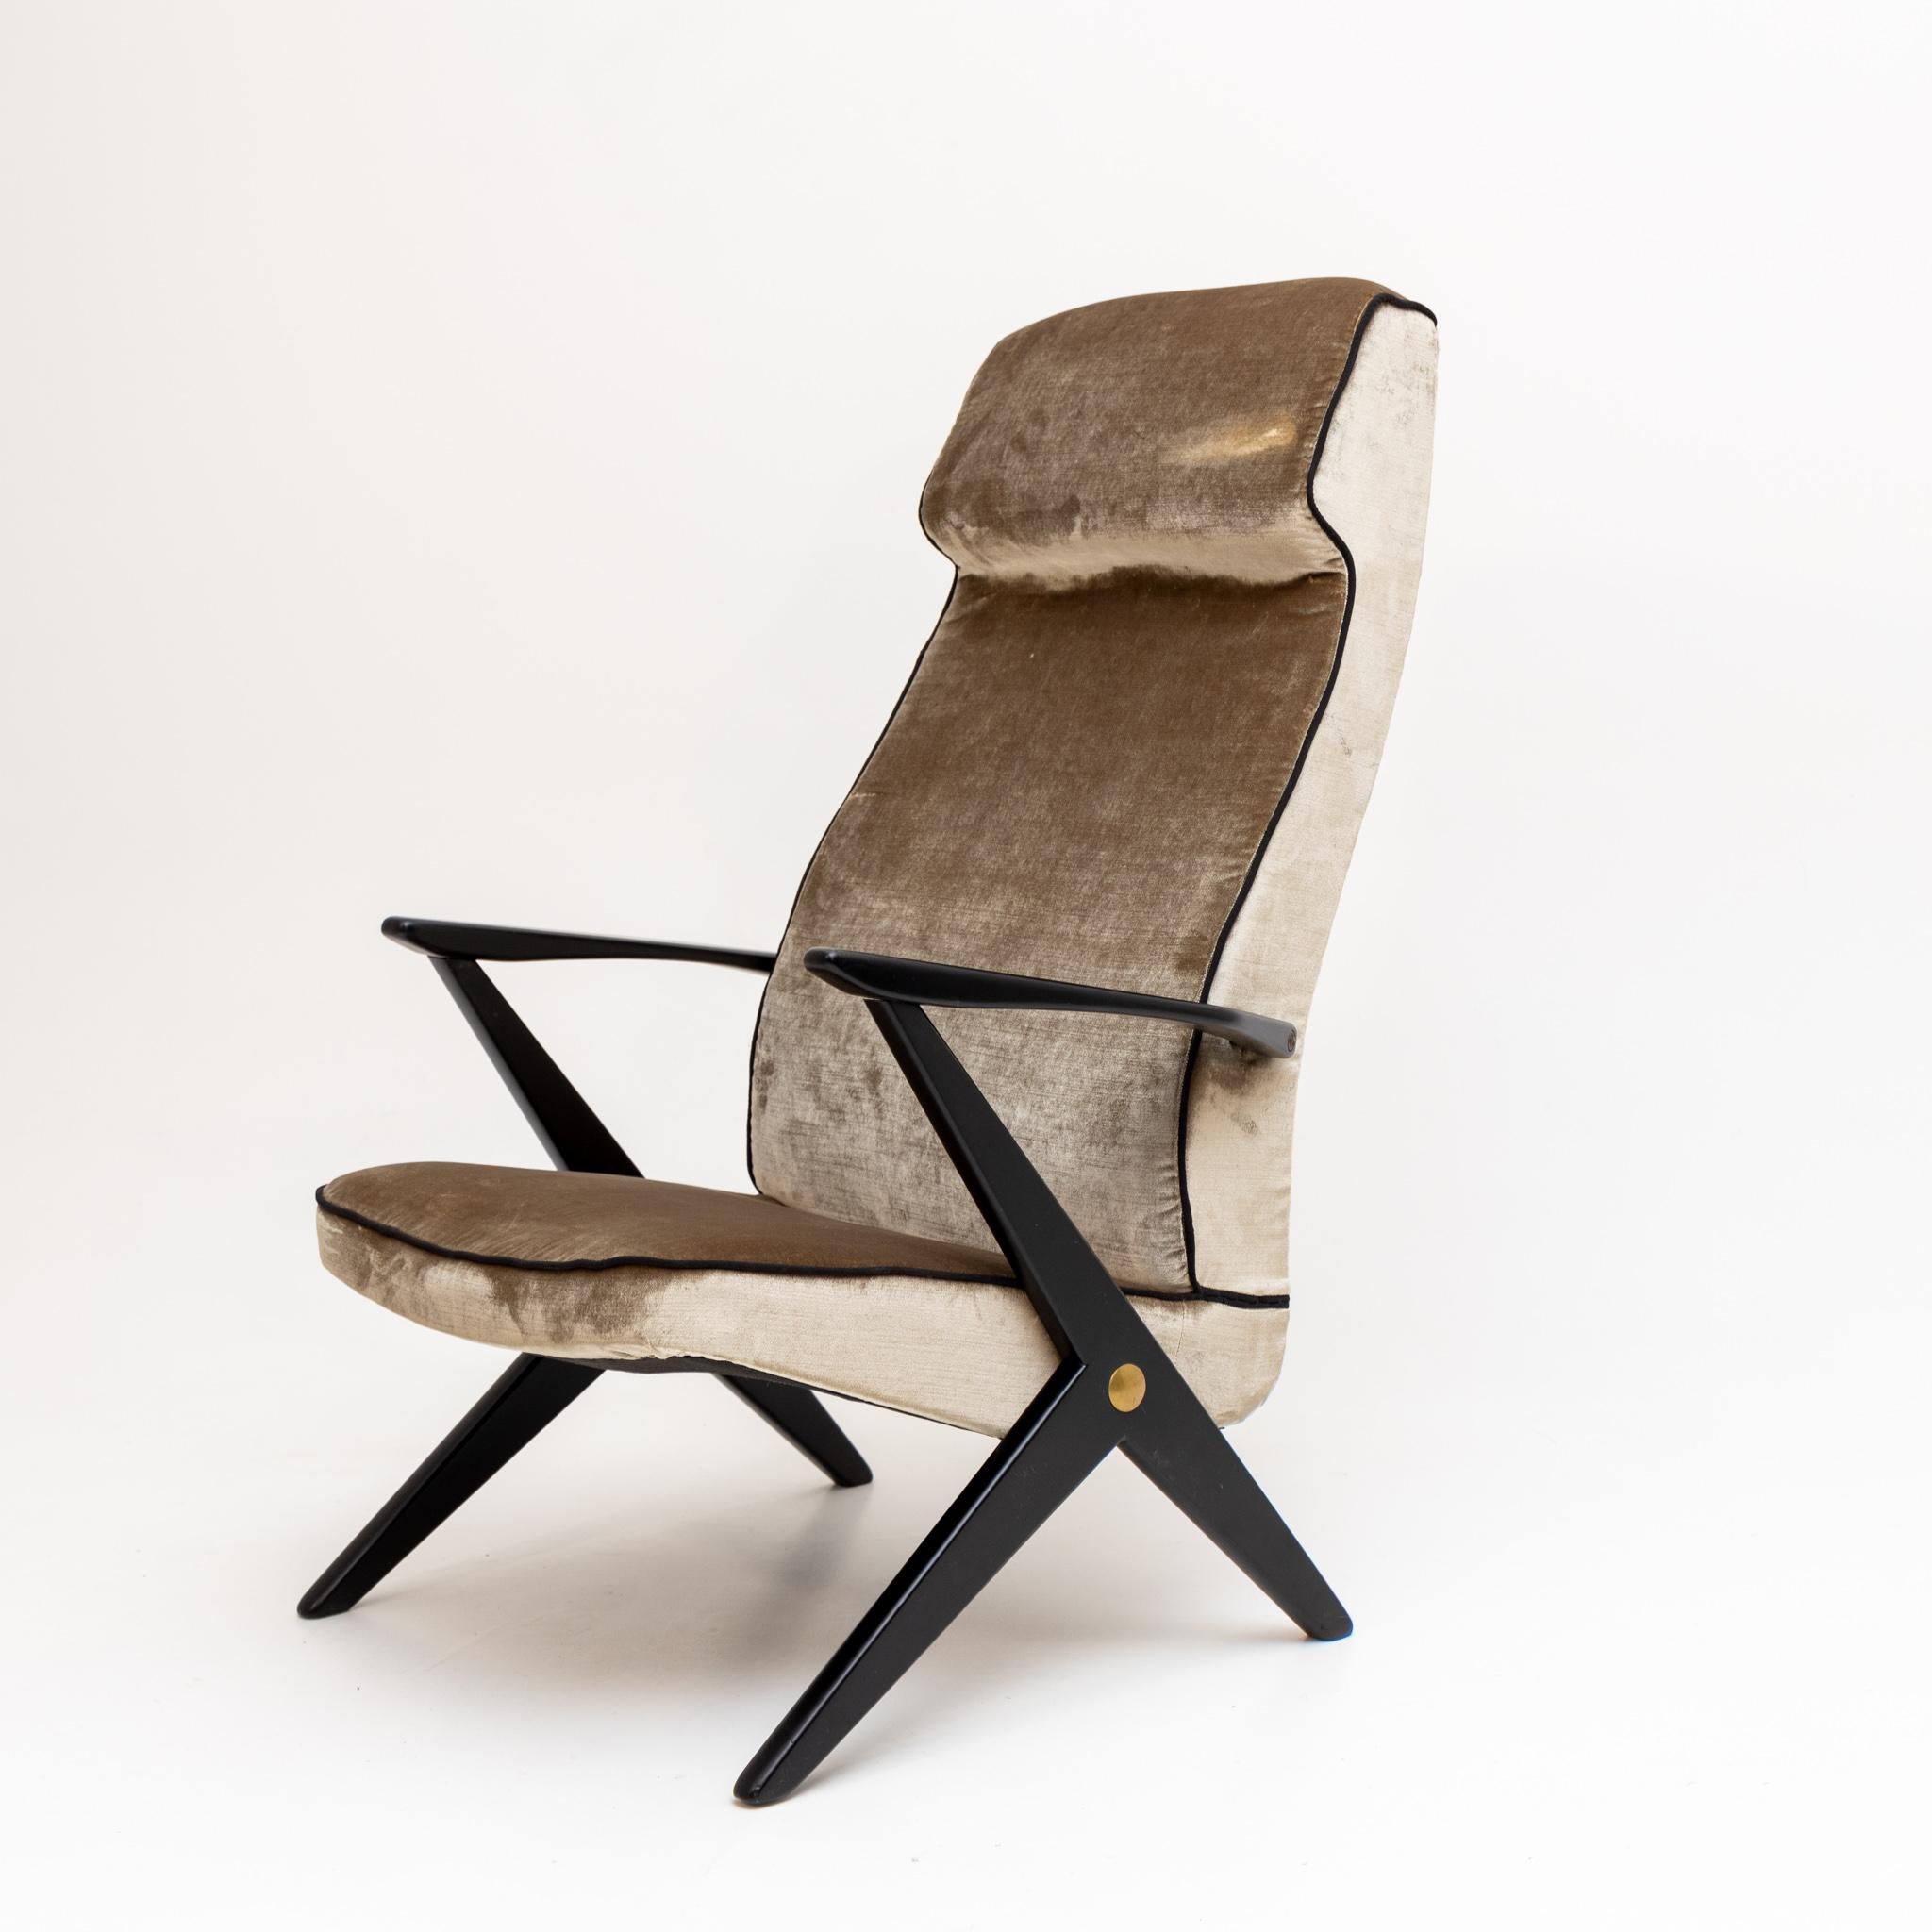 Armchair with ebonized frame and newly upholstered seat and backrest in grey velvet.